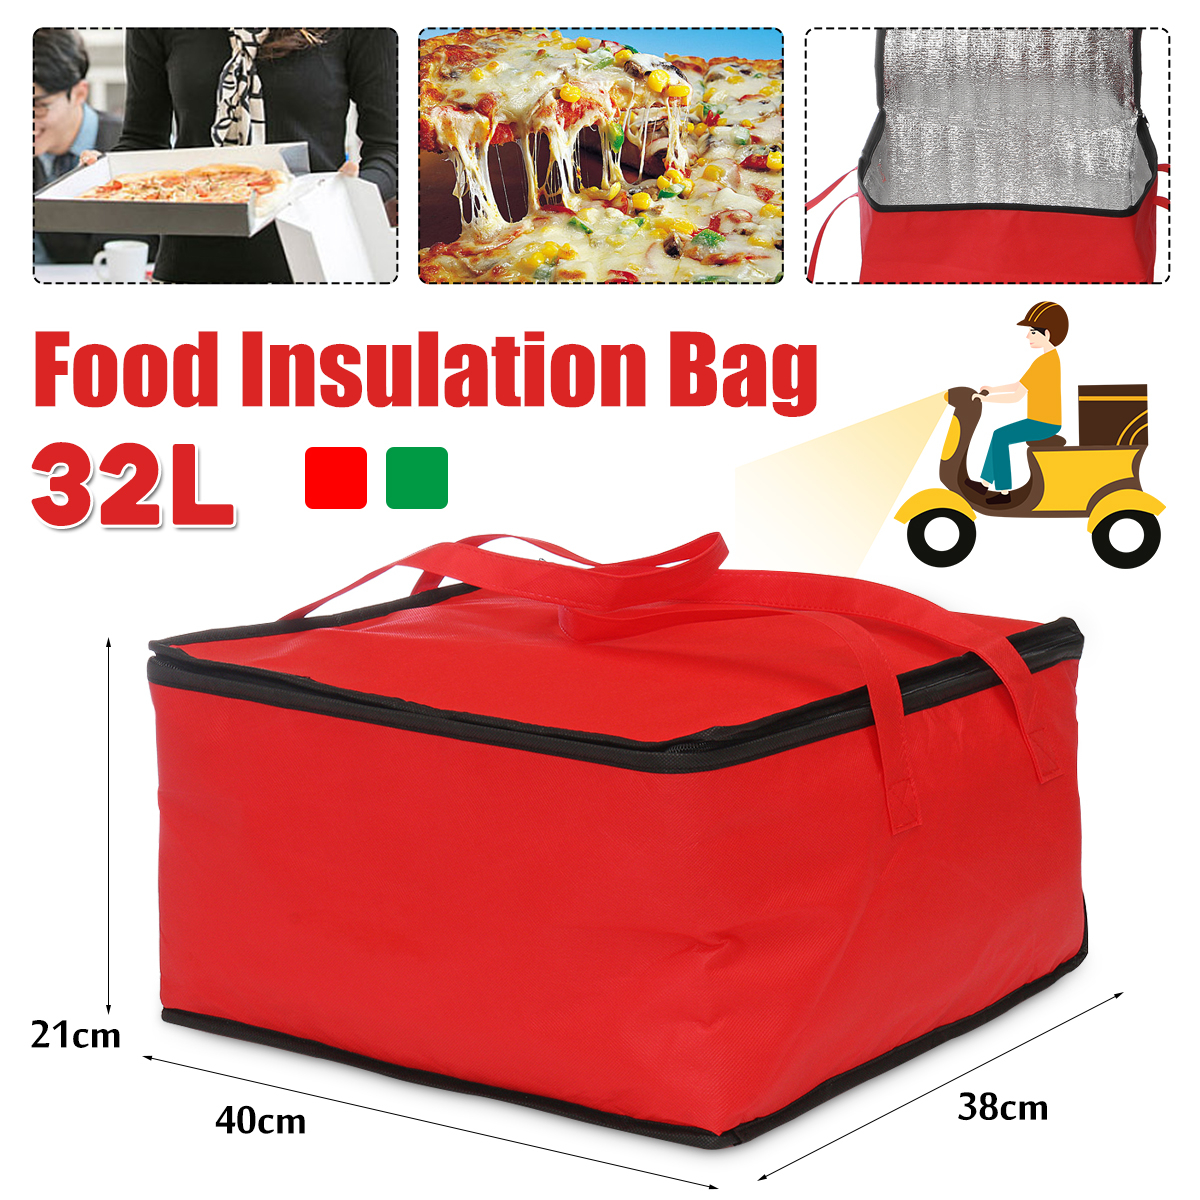 32L-Outdoor-Portable-Picnic-Bag-Insulated-Thermal-Cooler-Bag-Lunch-Food-Pizza-Storage-Bag-1554675-1